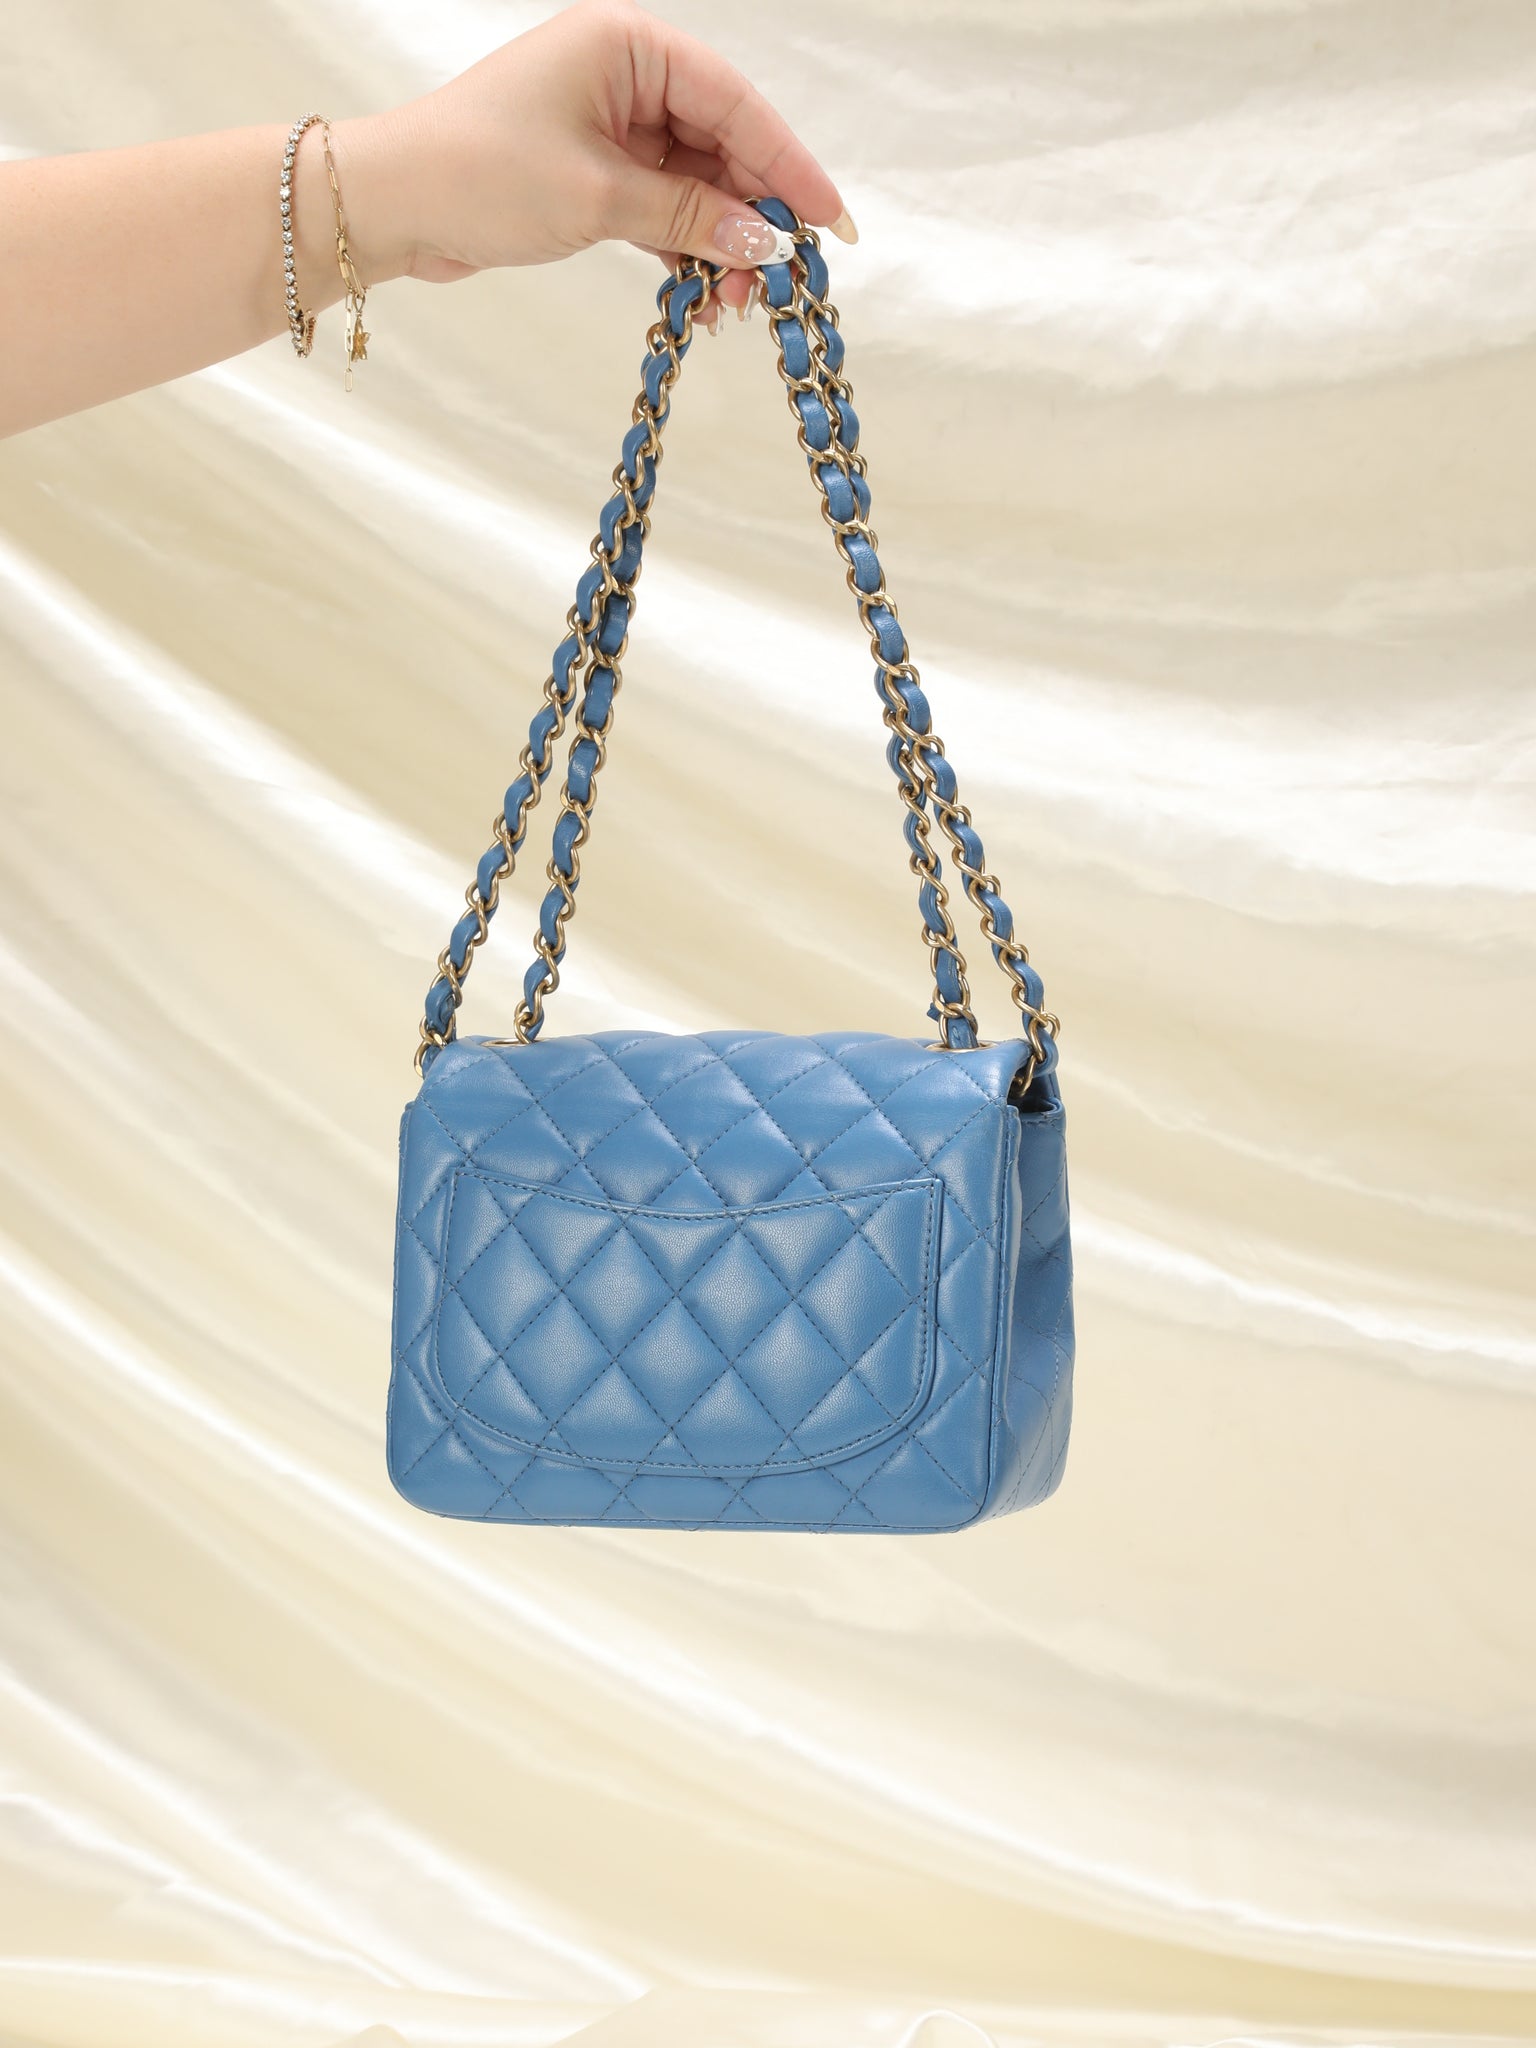 Chanel Blue Quilted Lambskin Leather Chanel 19 Small Flap Bag